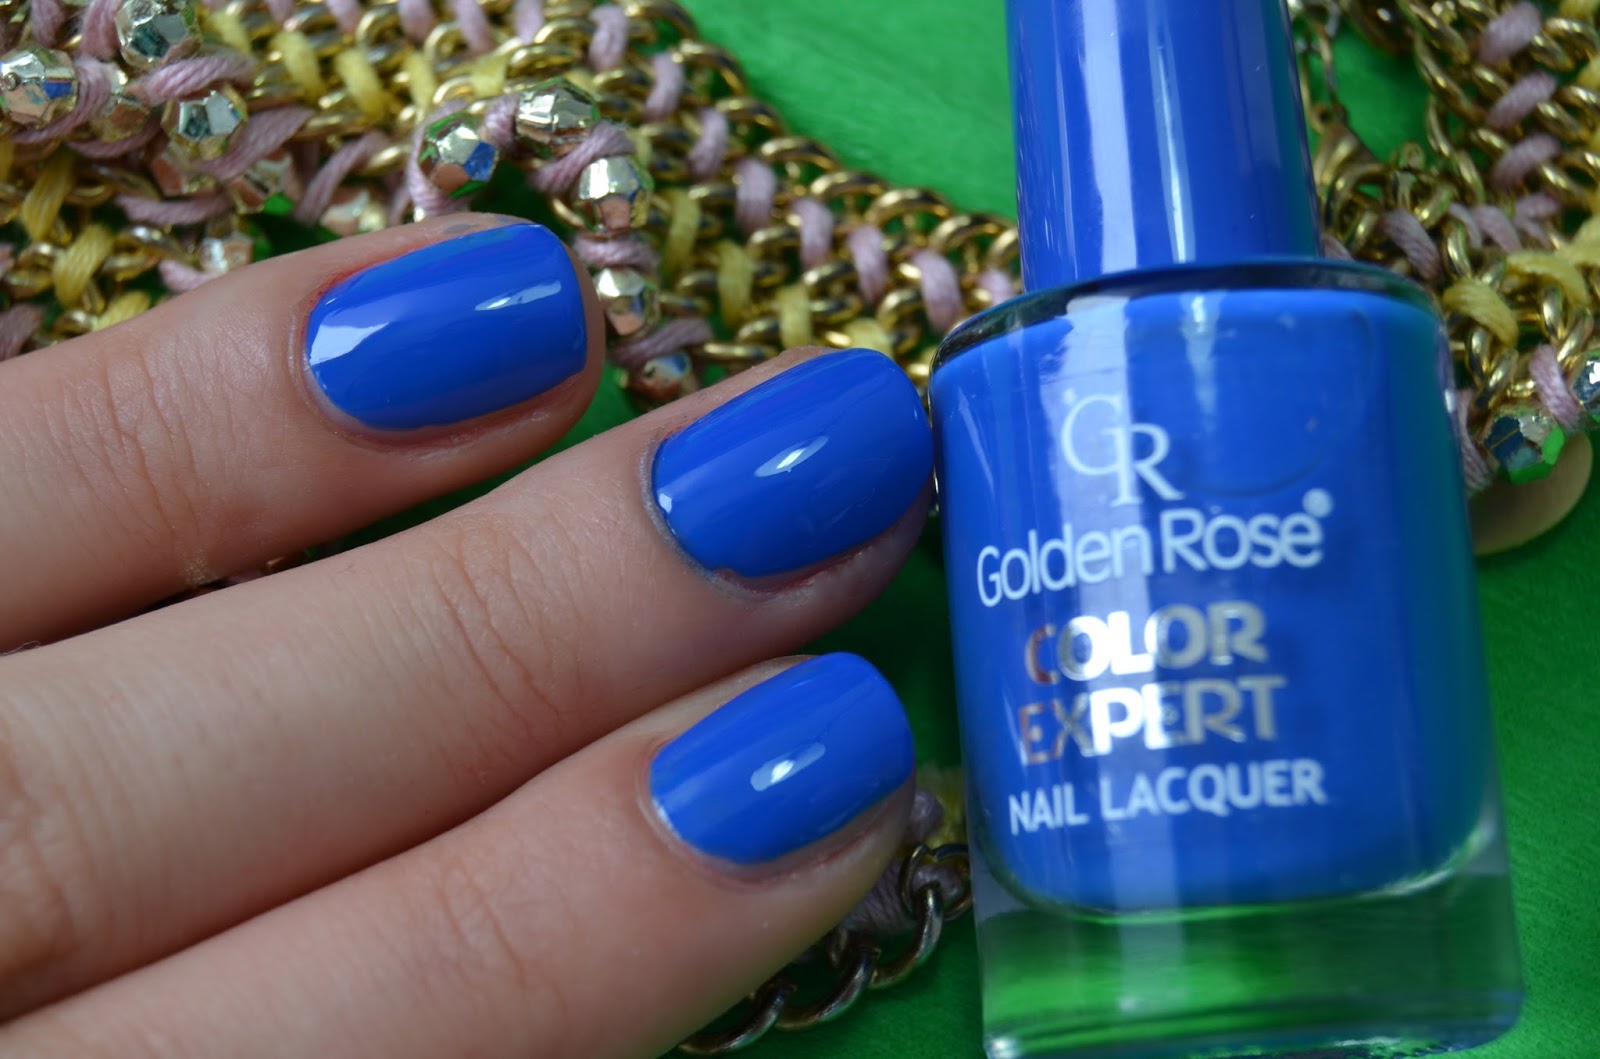 Golden Rose Color Expert Nail Lacquer 102 - wide 6